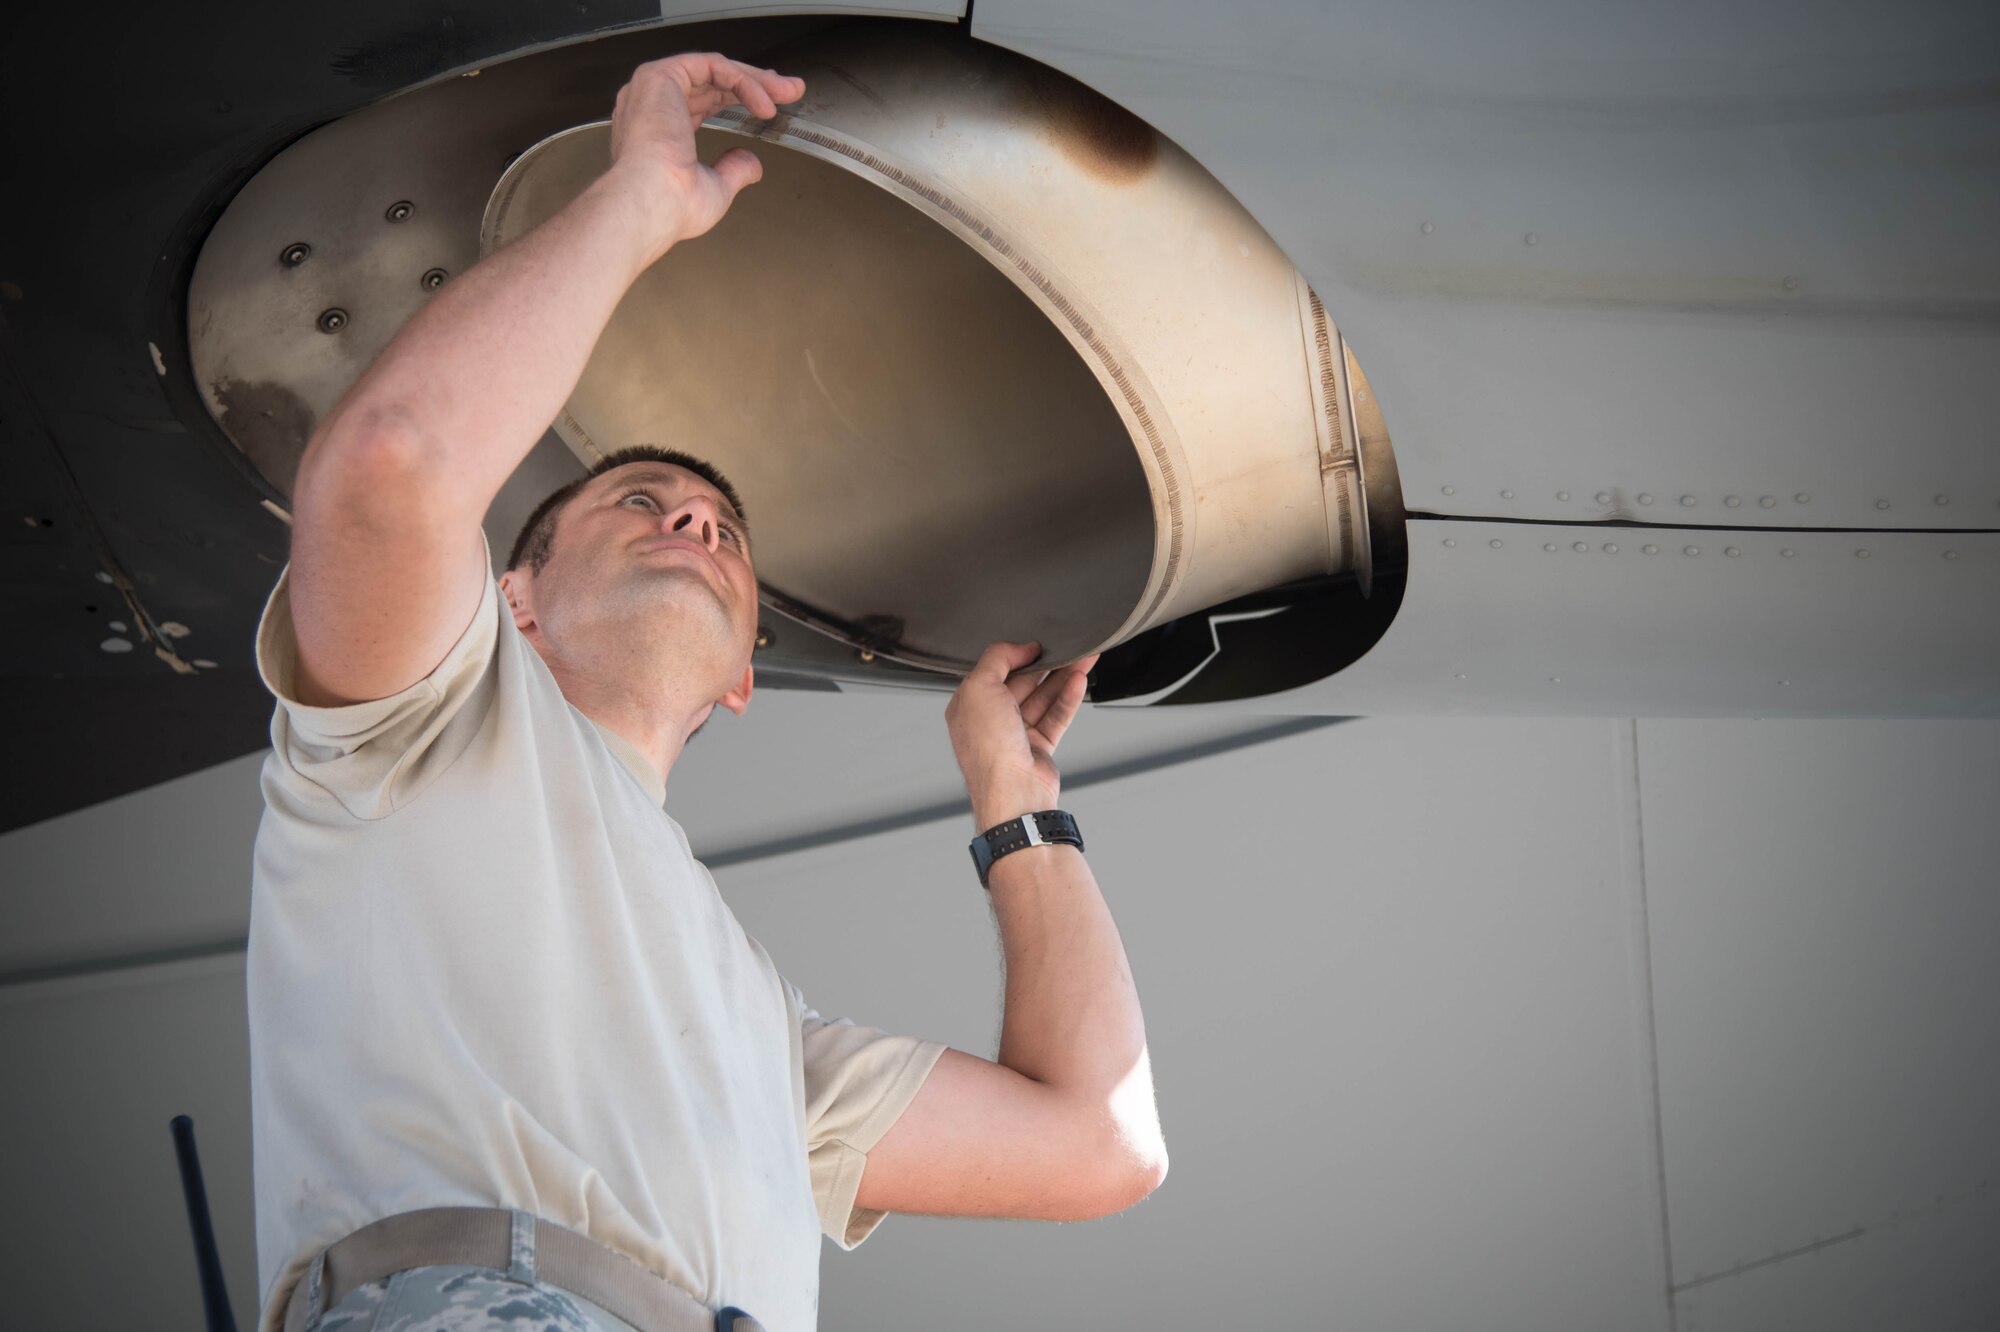 Master Sgt. Jonathan McCarty, 403rd Aircraft Maintenance Squadron crew chief inspects the engine of an 815th Airlift Squadron C-130-J Super Hercules. He is one of the Airmen scheduled to become part of the new 803rd Aircraft Maintenance Squadron after its activation Sept. 11. (U.S. Air Force photo/Senior Airman Heather Heiney) 